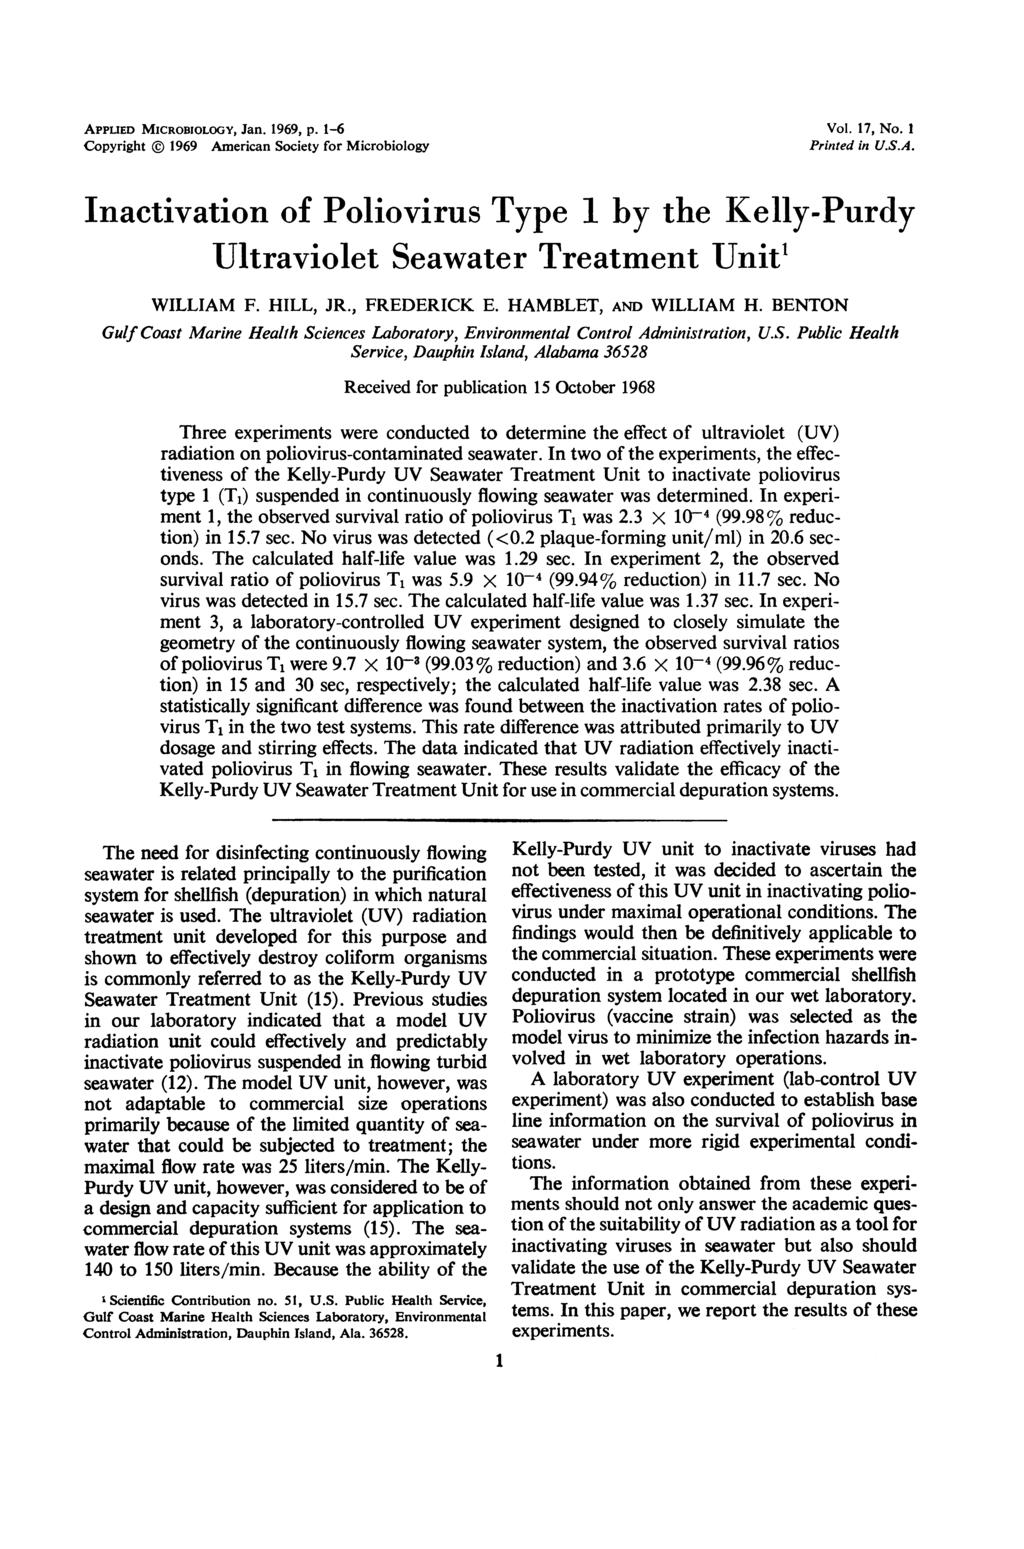 APPLIED MICROBIOLOGY, Jan. 1969, p. 1-6 Copyright 1969 American Society for Microbiology Vol. 17, No. I Printed in U.S.A. Inactivation of Poliovirus Type 1 by the Kelly-Purdy Ultraviolet Seawater Treatment Unit' WILLIAM F.